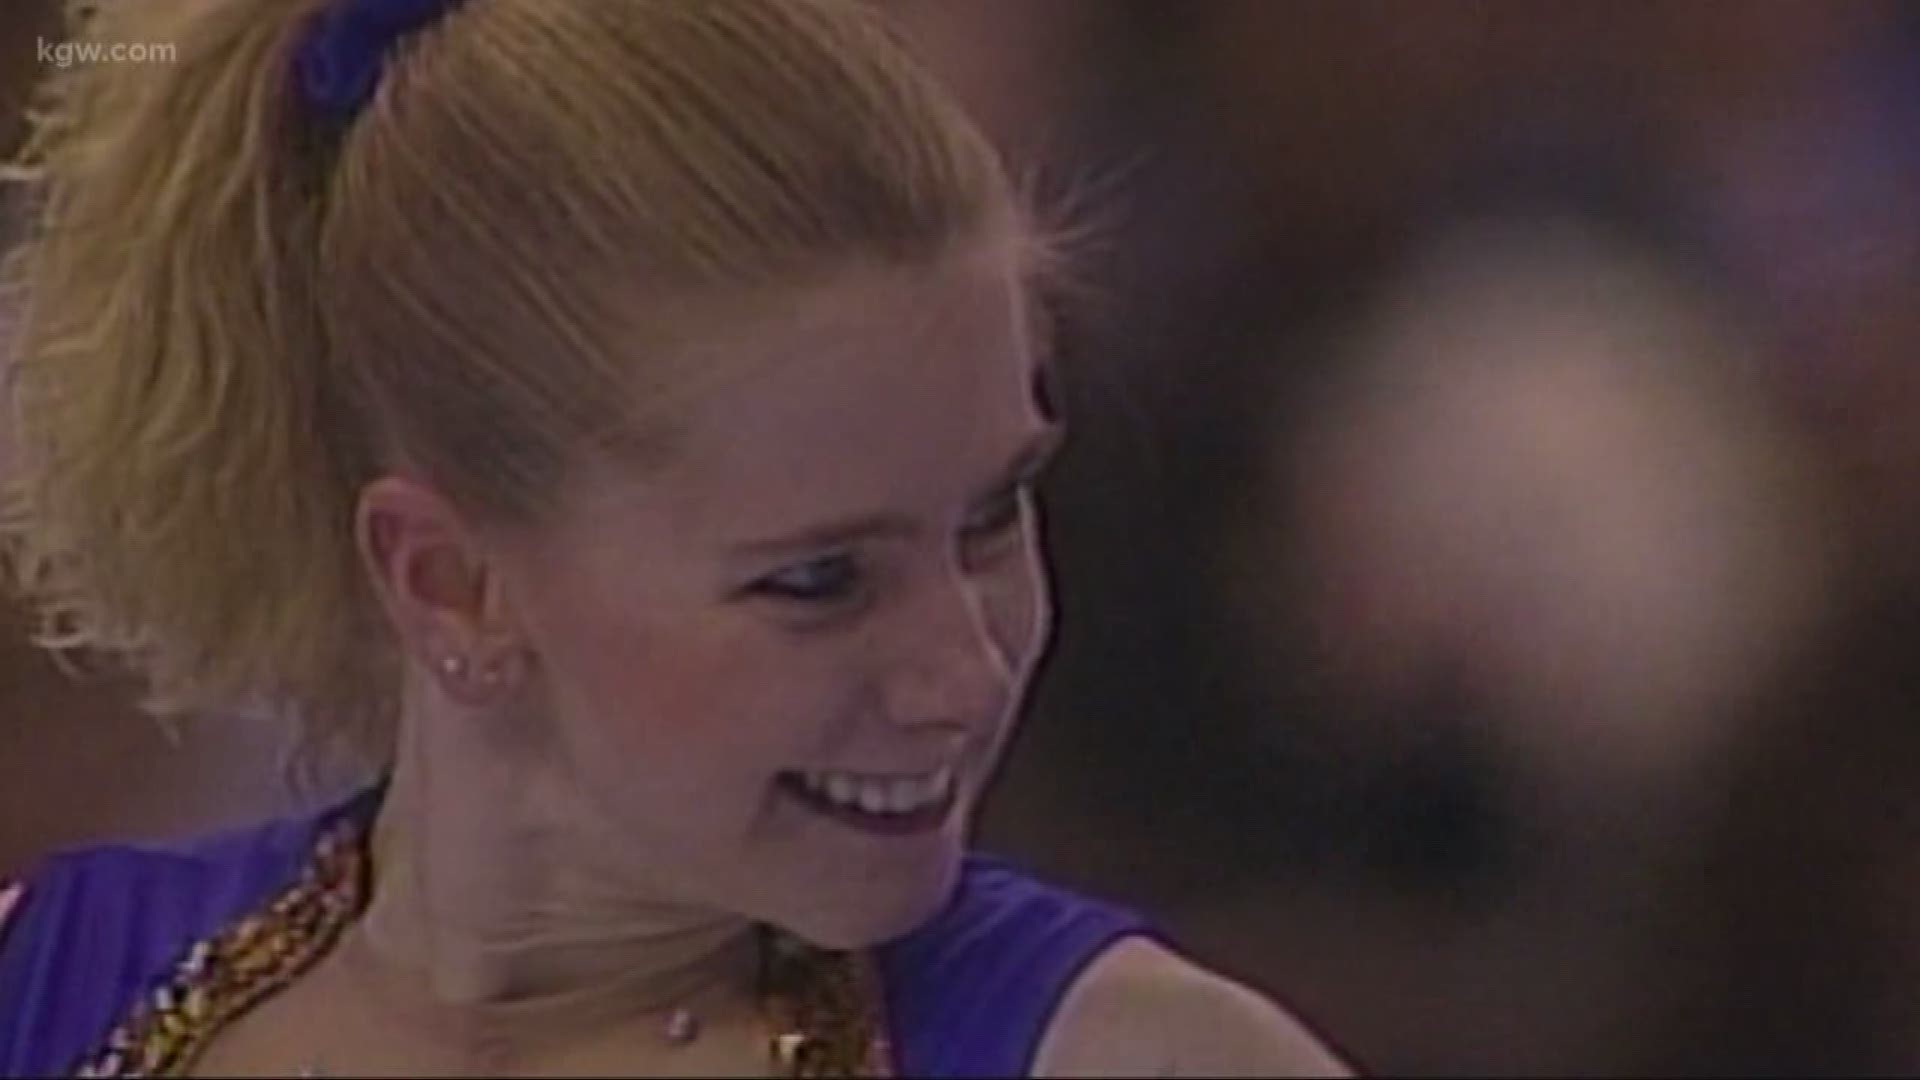 Tonya Harding to join 'Dancing with the Stars'